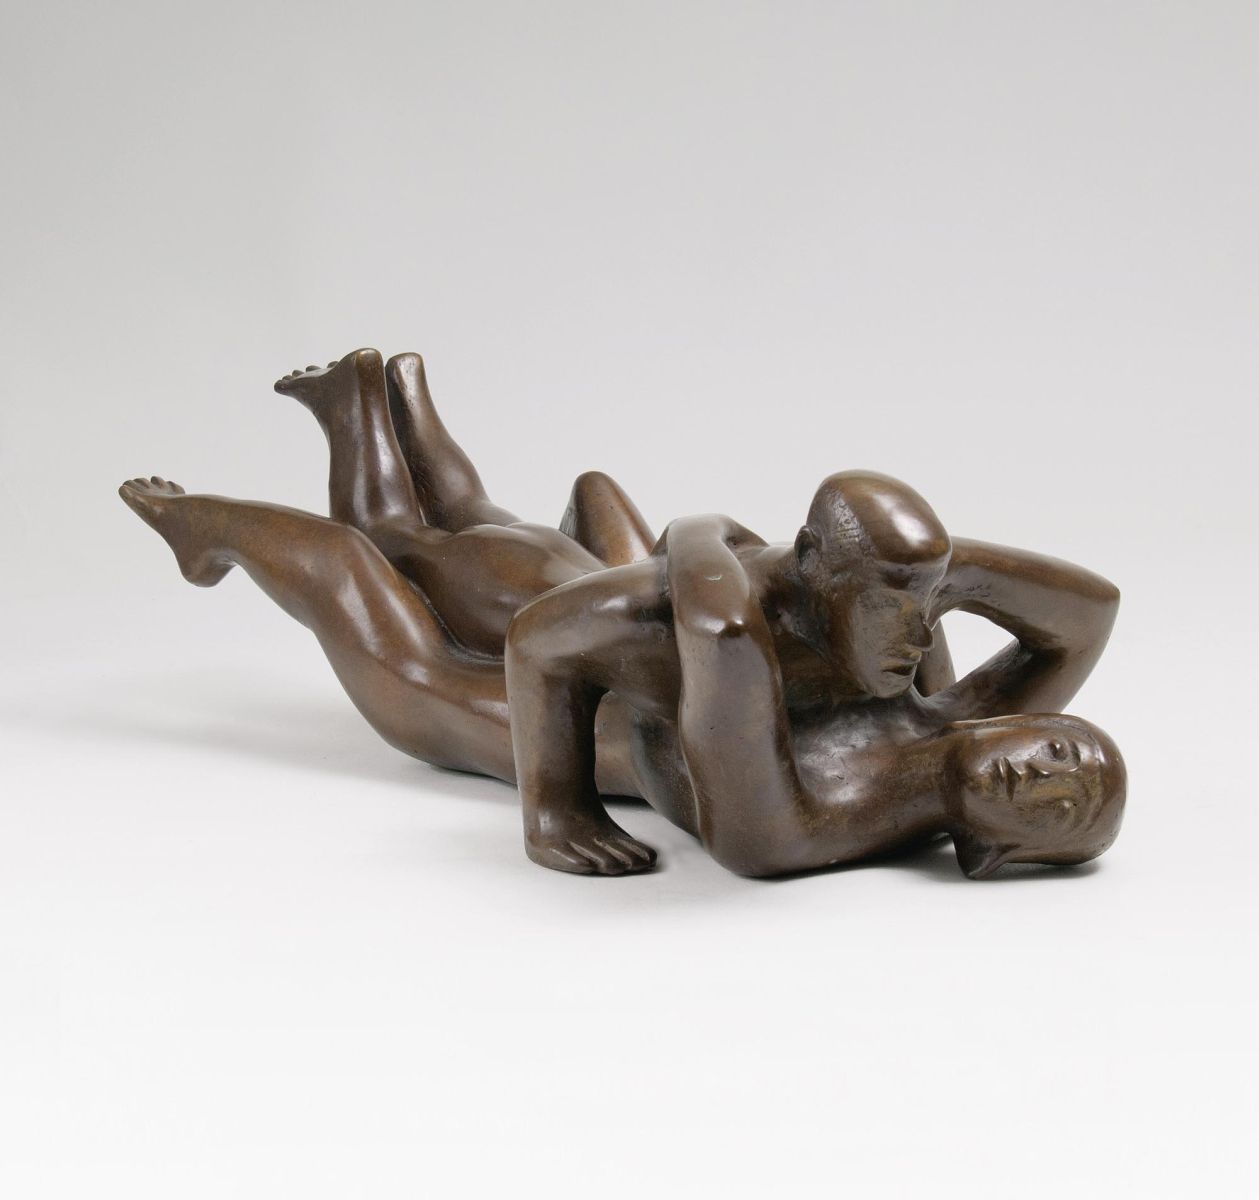 A Figure Group 'Nach alter Sitte' - 'A Couple Making Love'